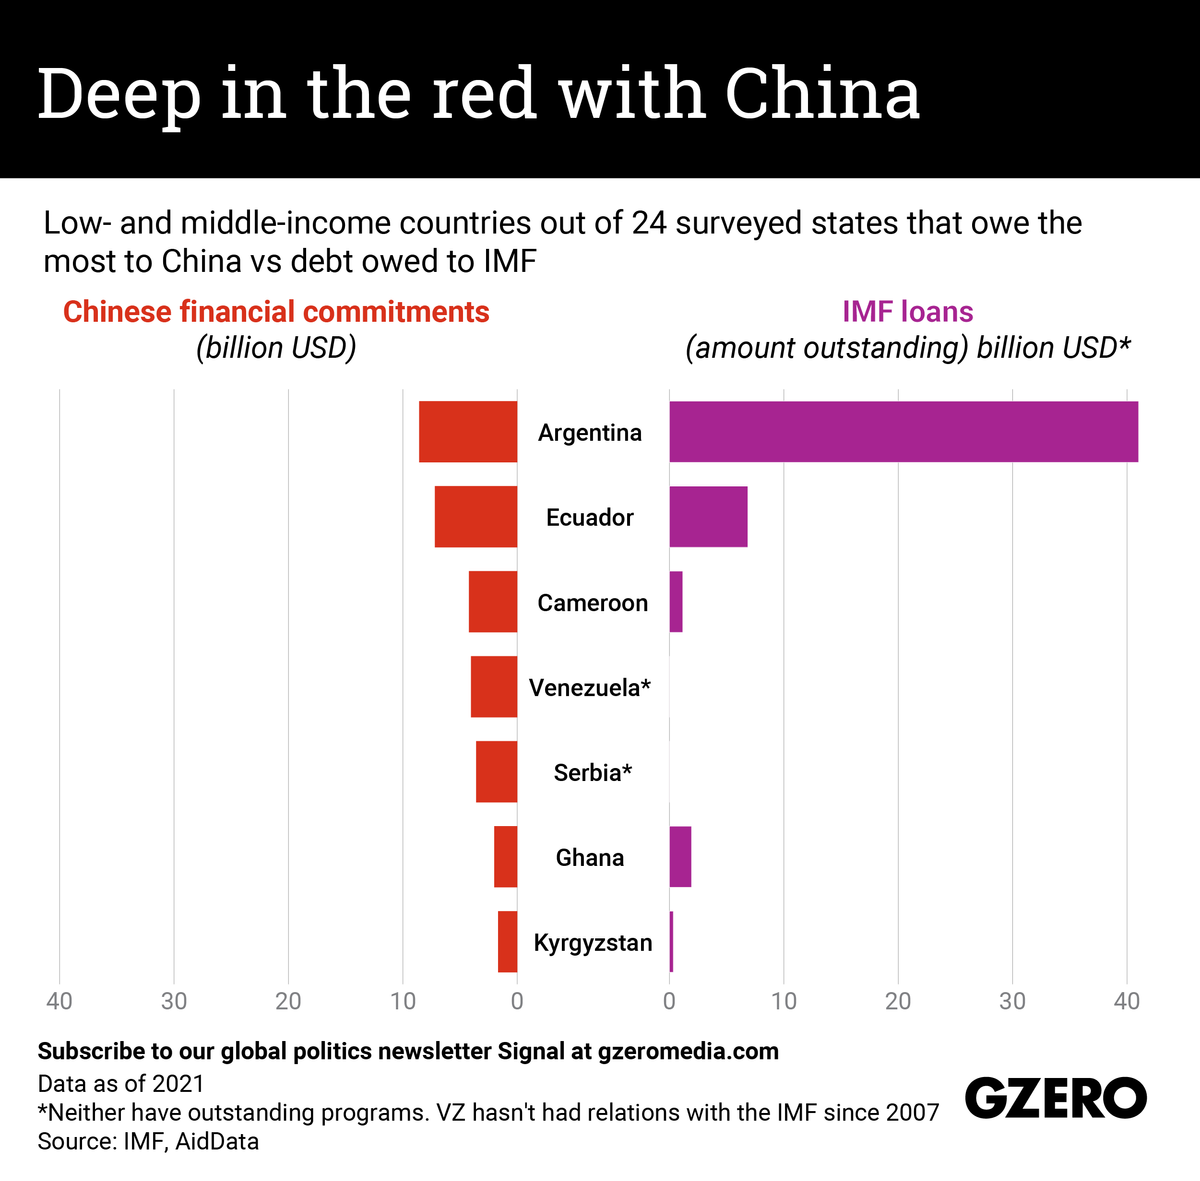 The Graphic Truth: Deep in the red with China